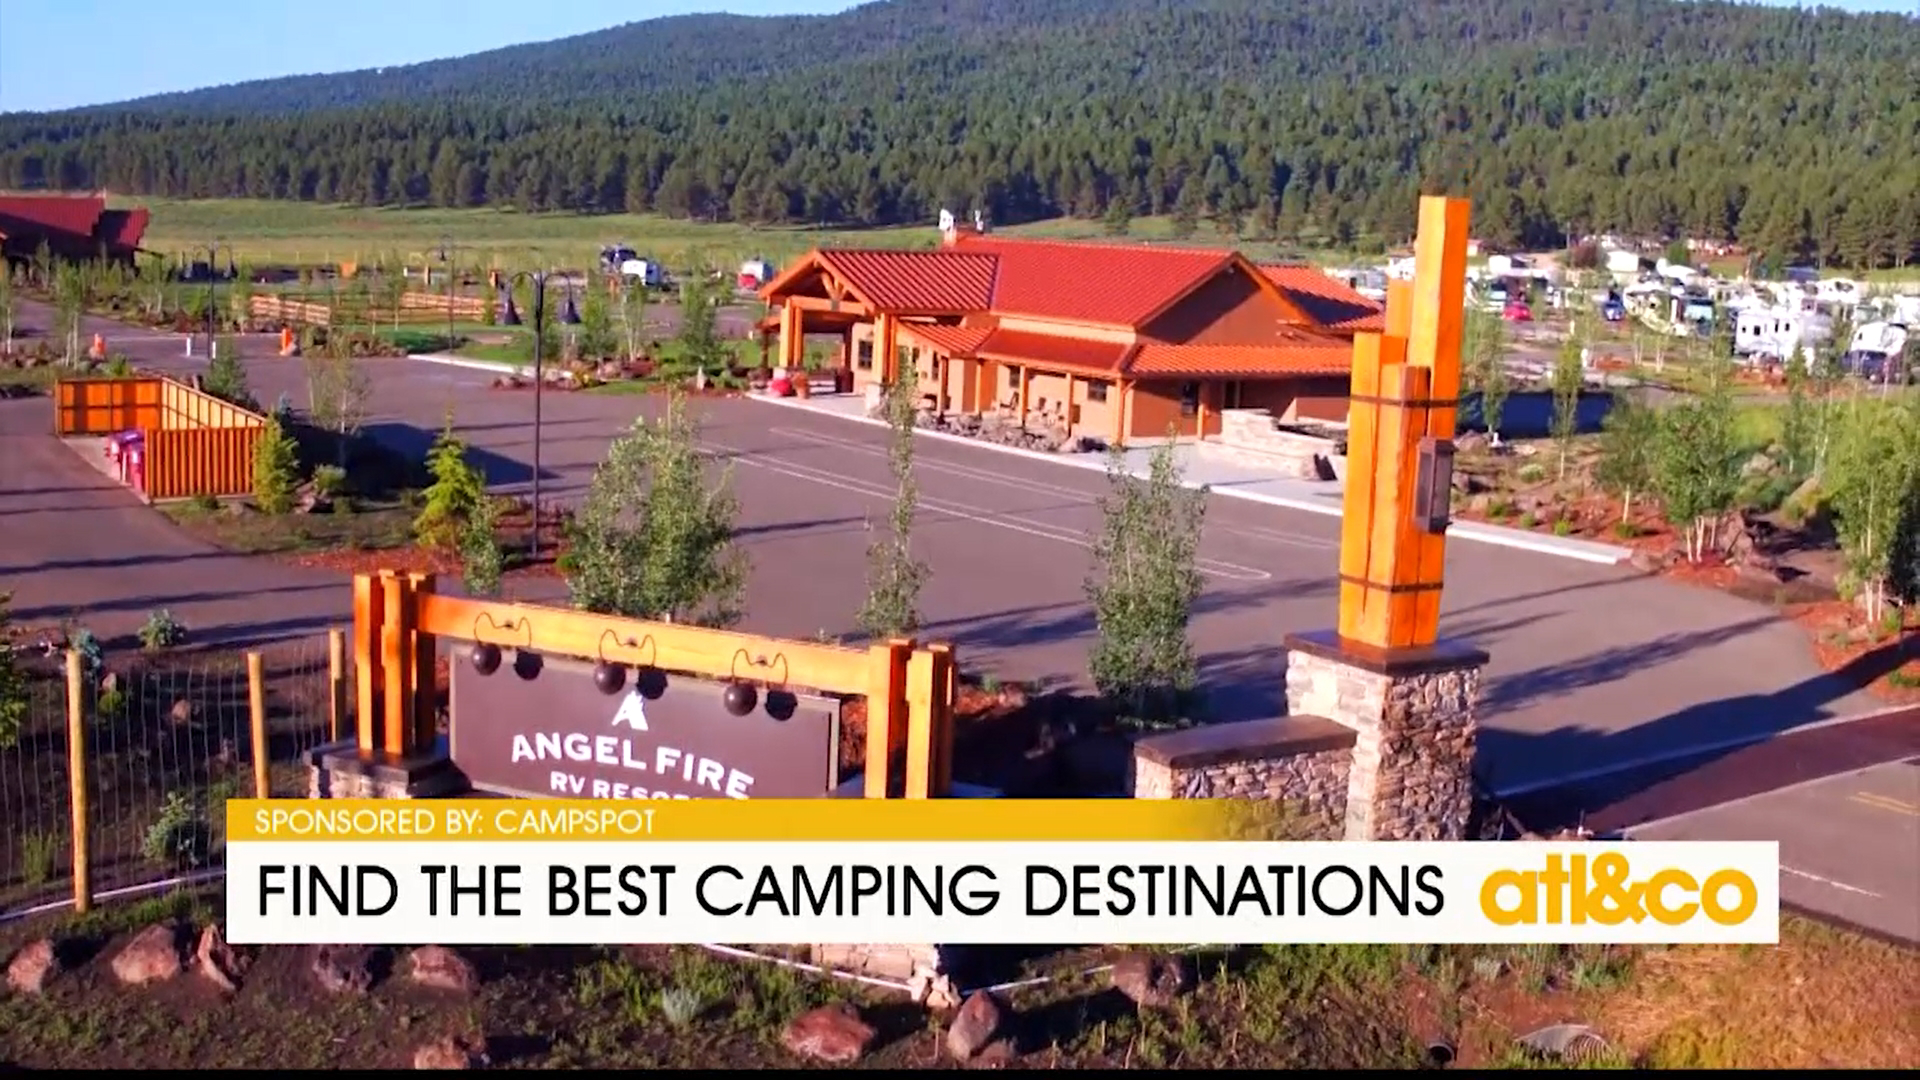 Discover and book the best campgrounds, RV parks, cabins, glamping, and more with Campspot.